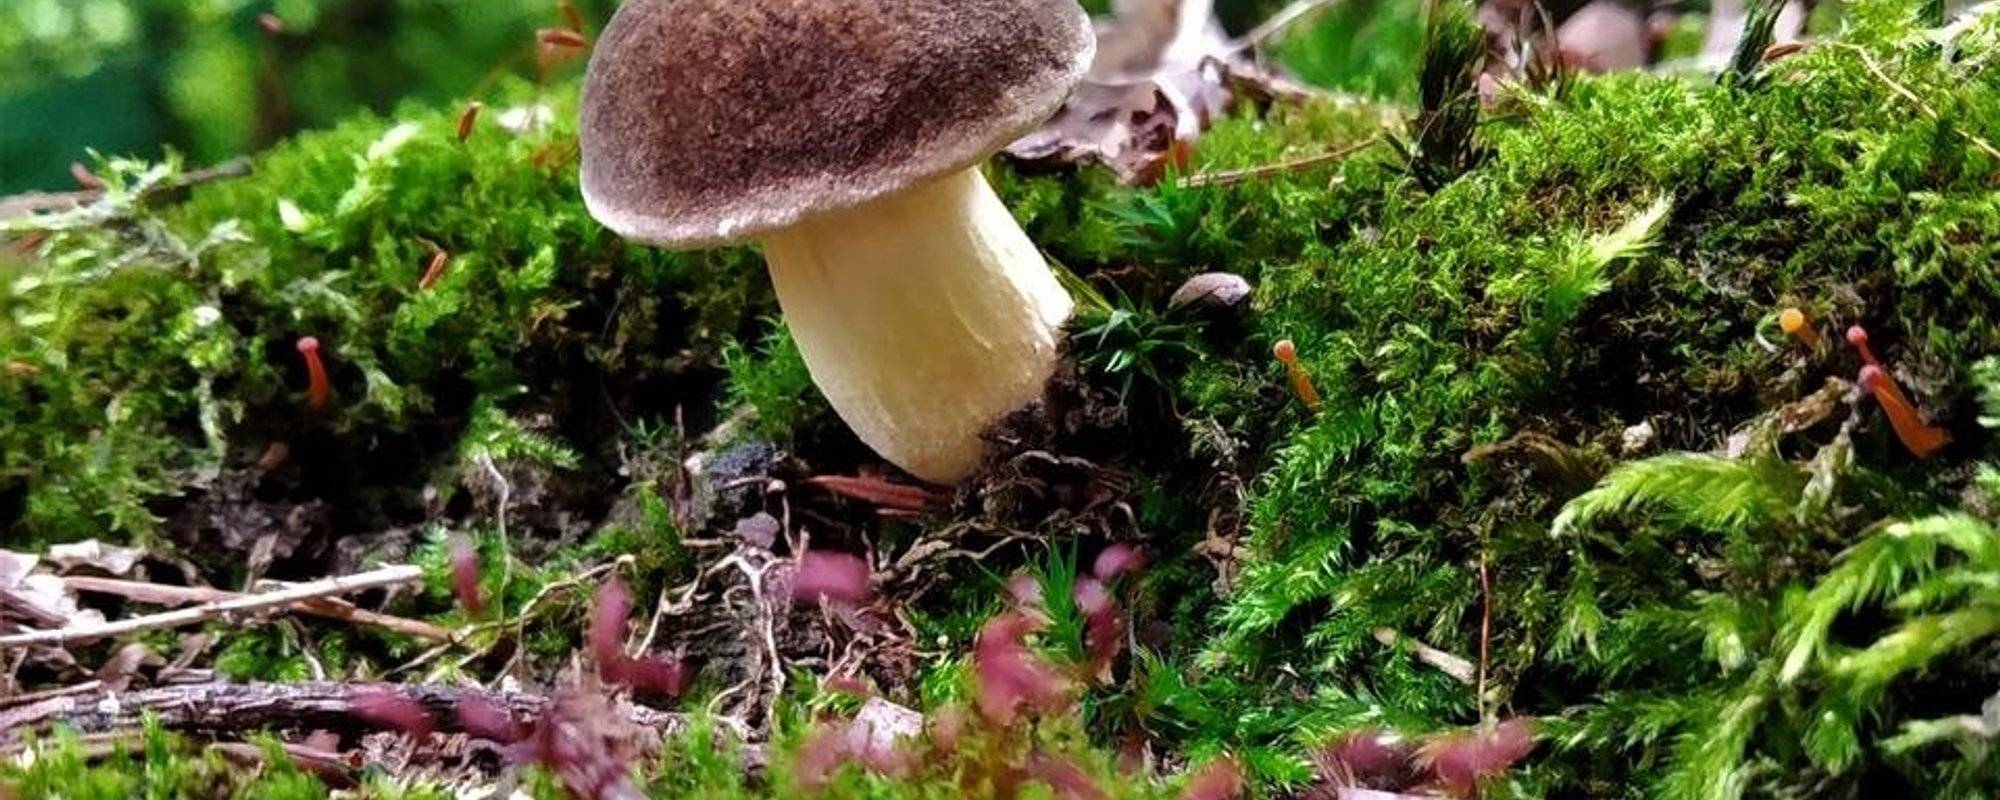 Great news from Czech forests: mushroom season is here